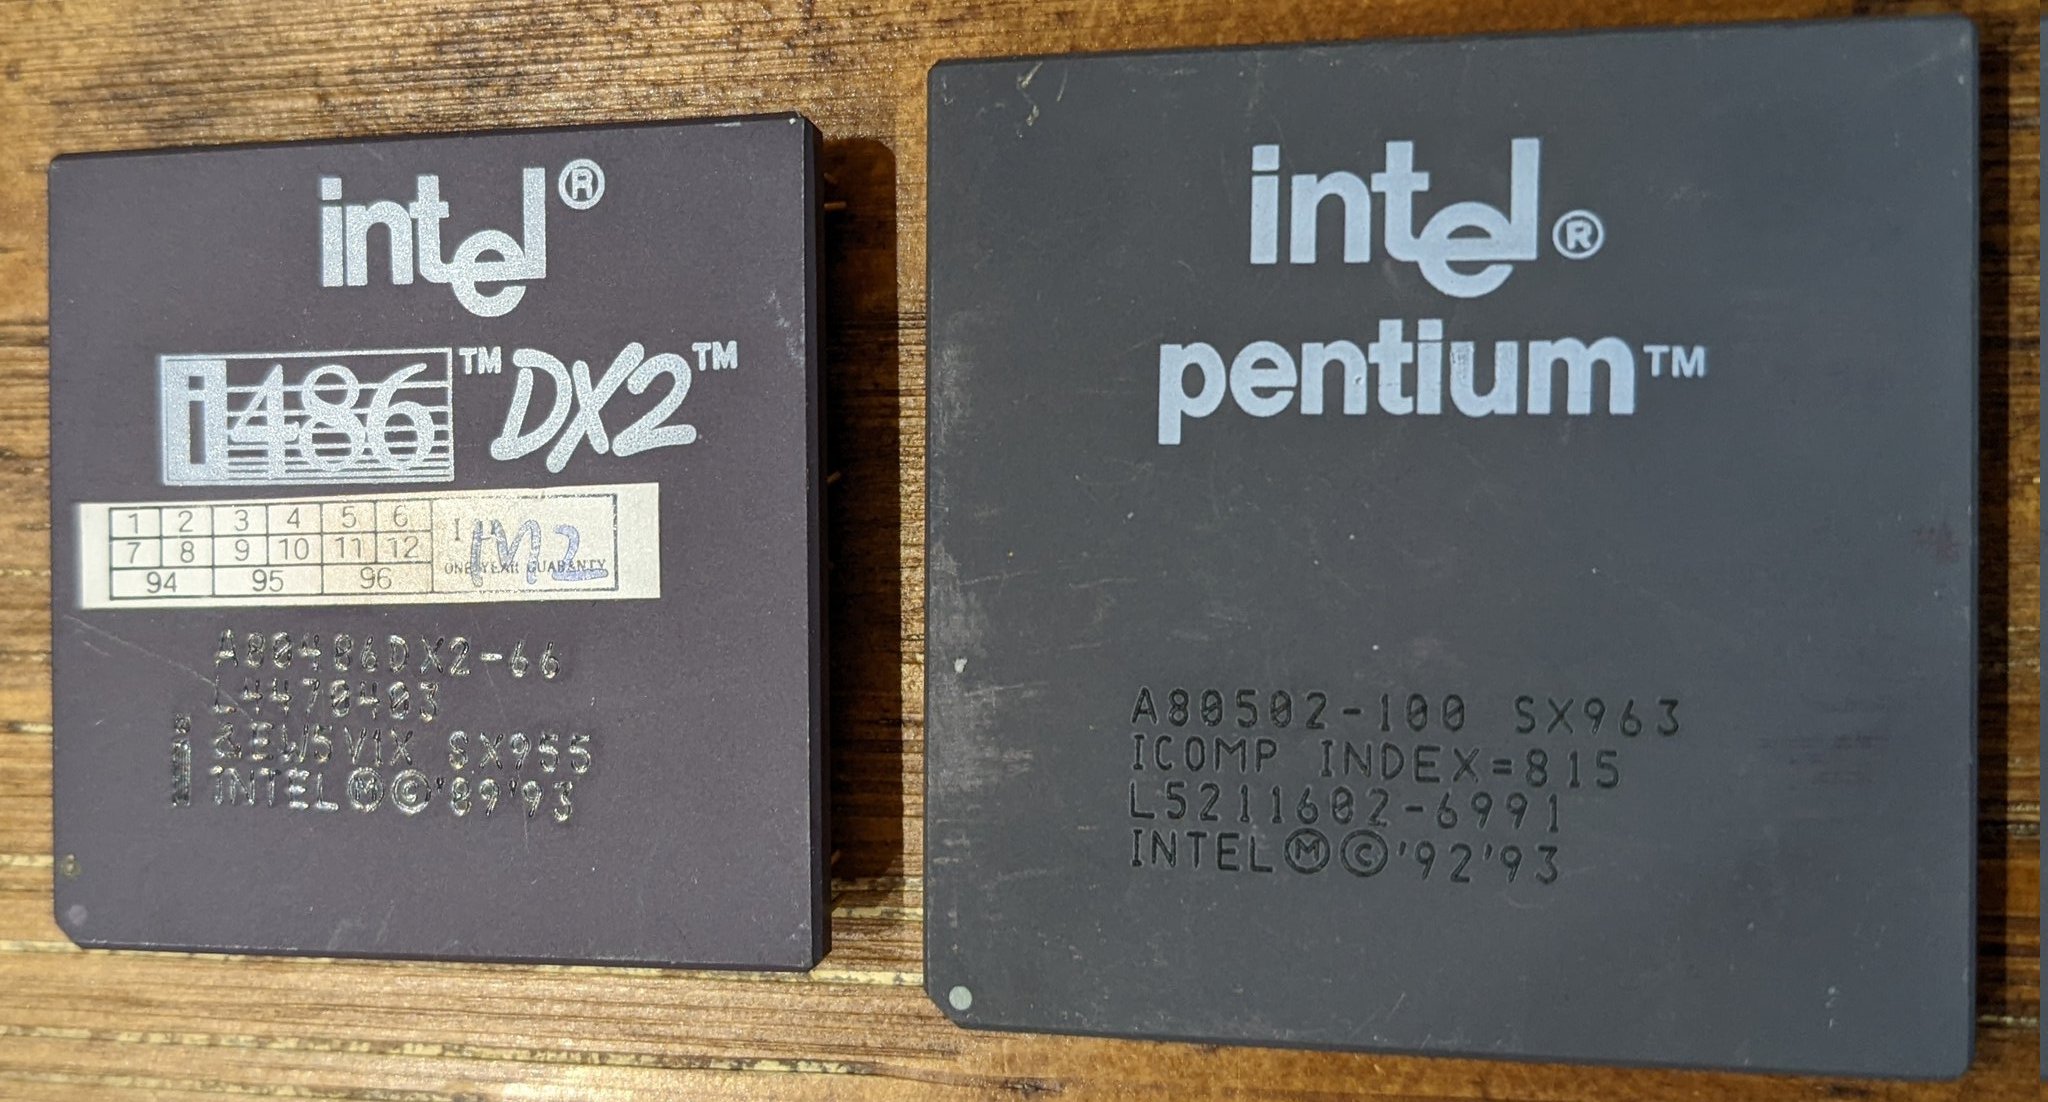 More Dodge Oxidize pentium - Twitter Search / Twitter